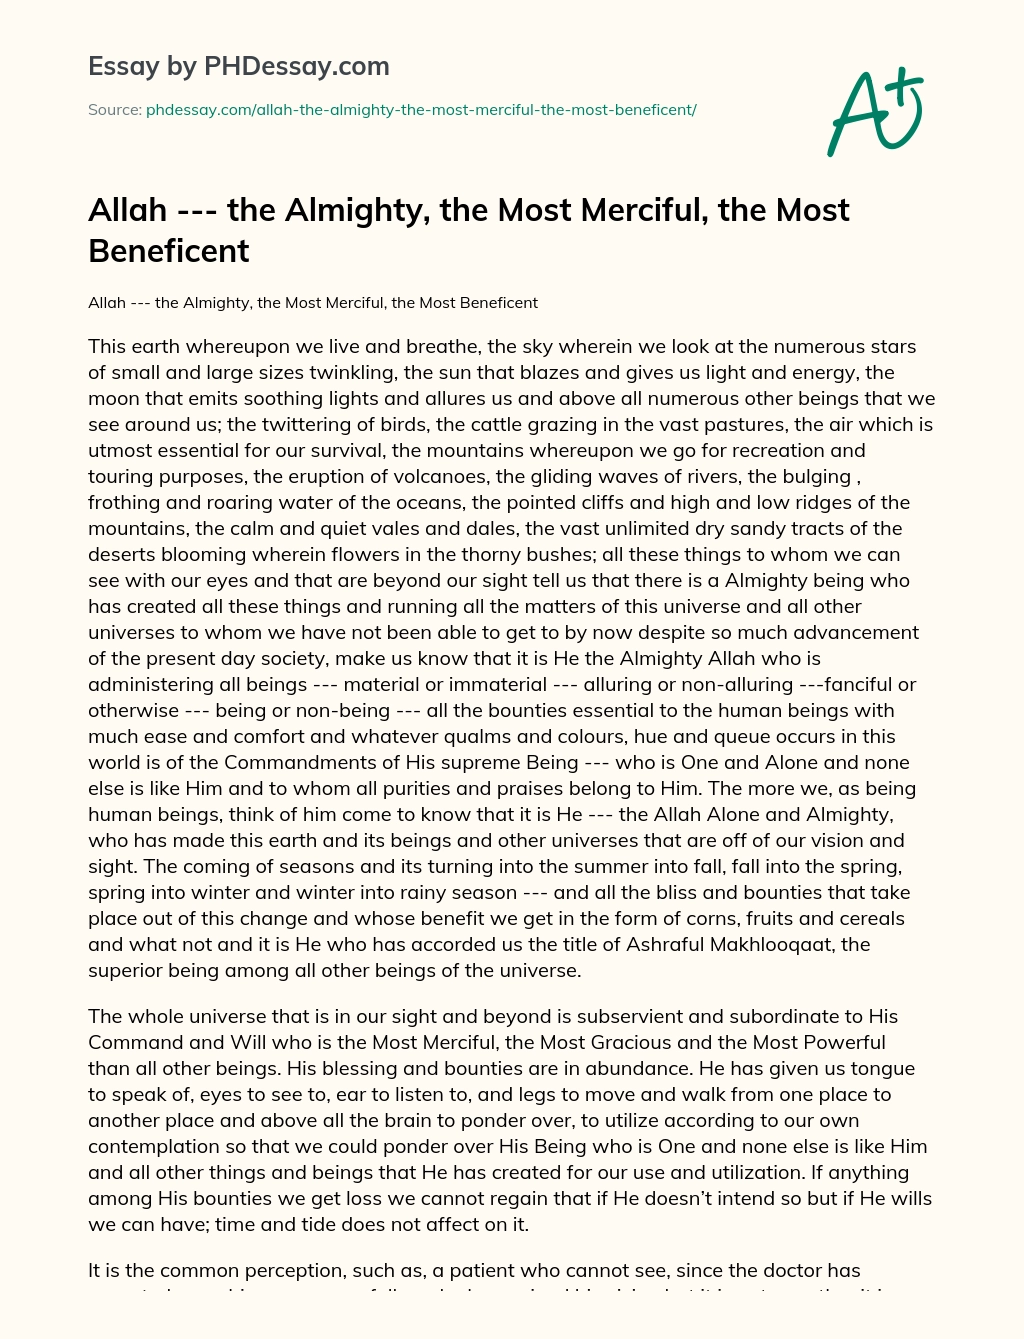 Allah – the Almighty, the Most Merciful, the Most Beneficent essay